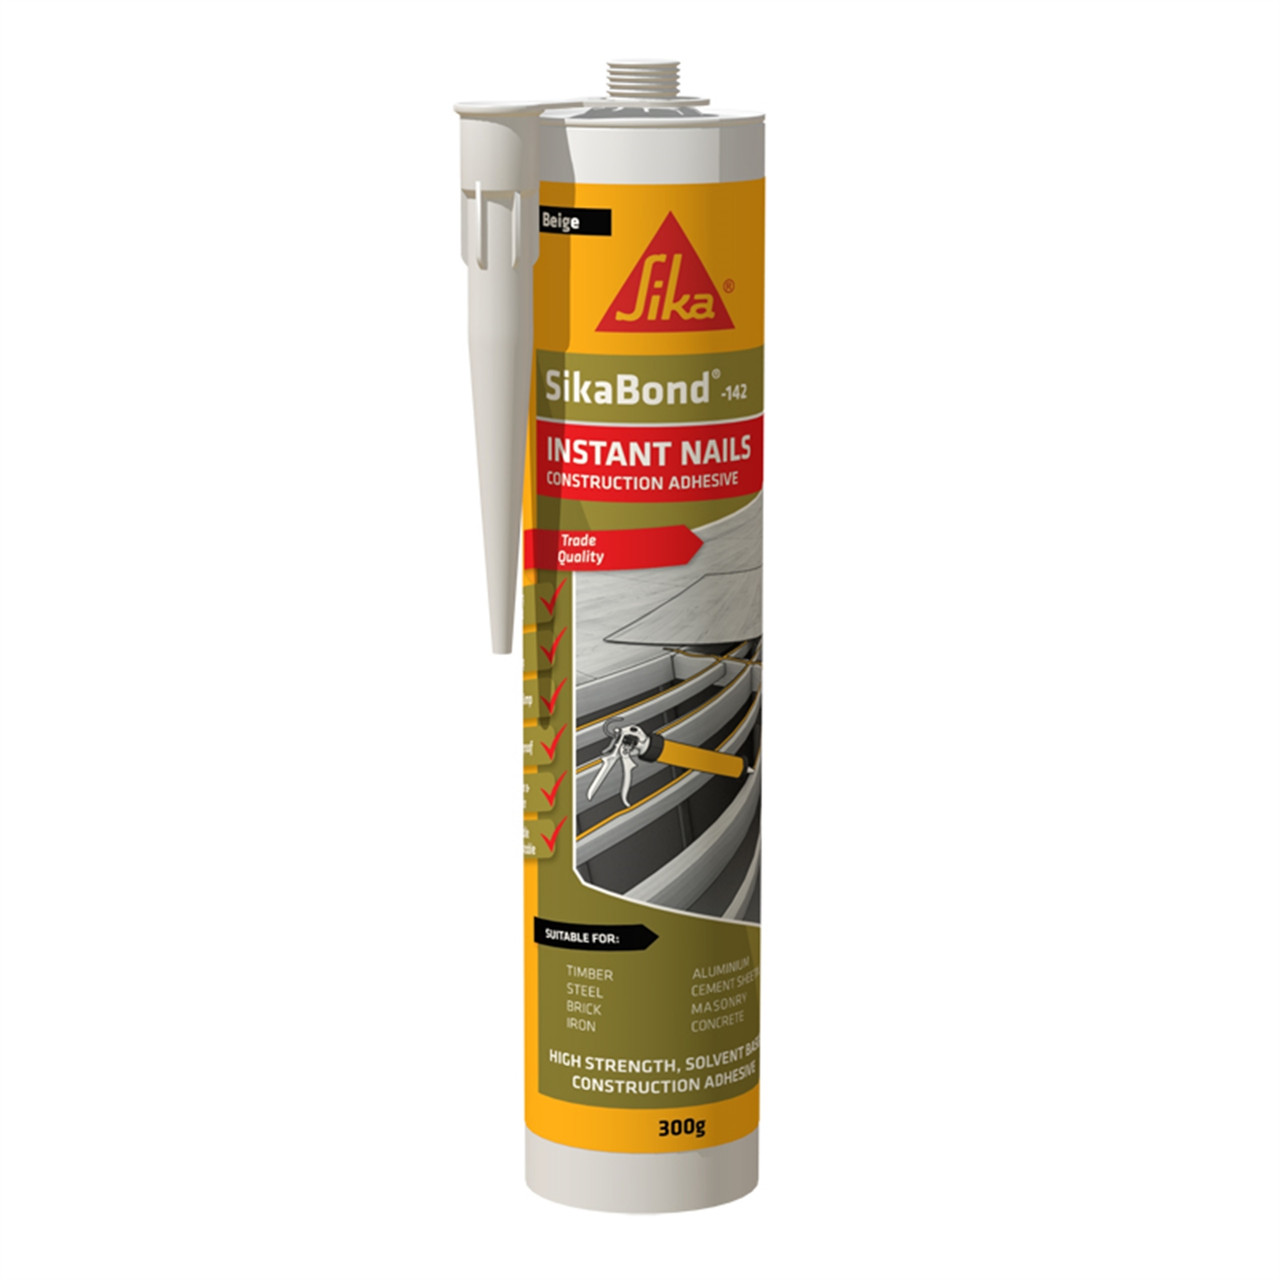 SIKA Adhesive | SIKABOND 142 Instant Nails Adhesive for Construction in 300mL Cartridge